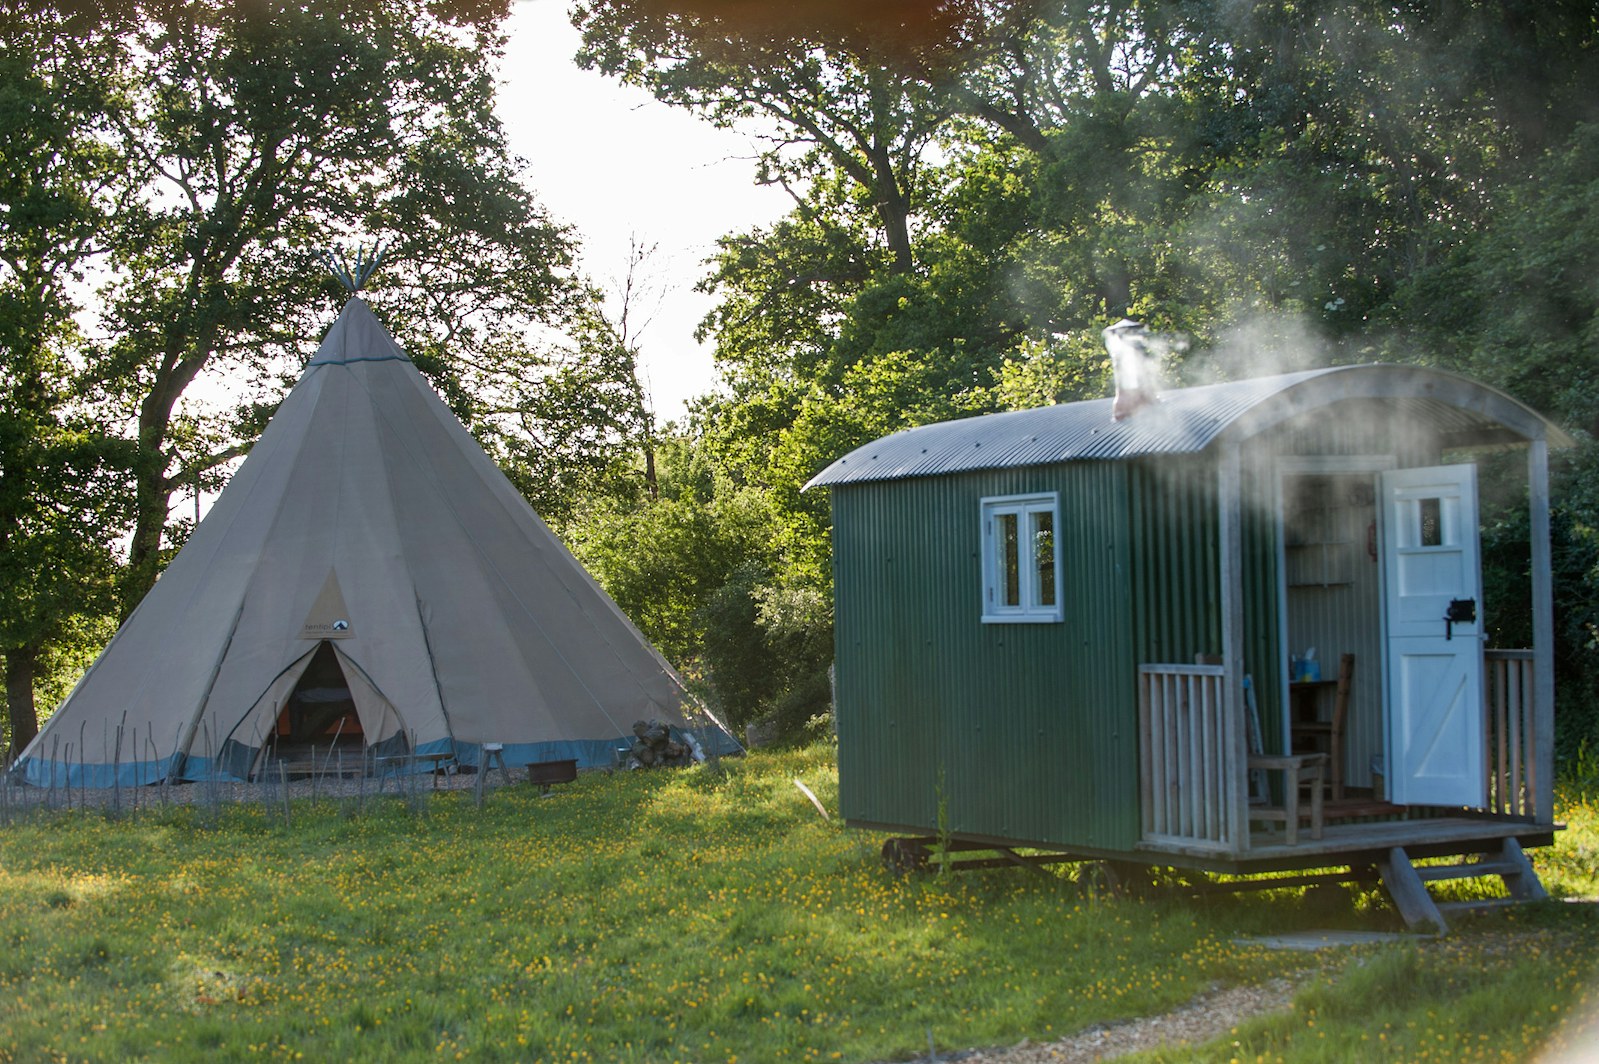 Tent and Shepherds Hut at the Knepp Estate